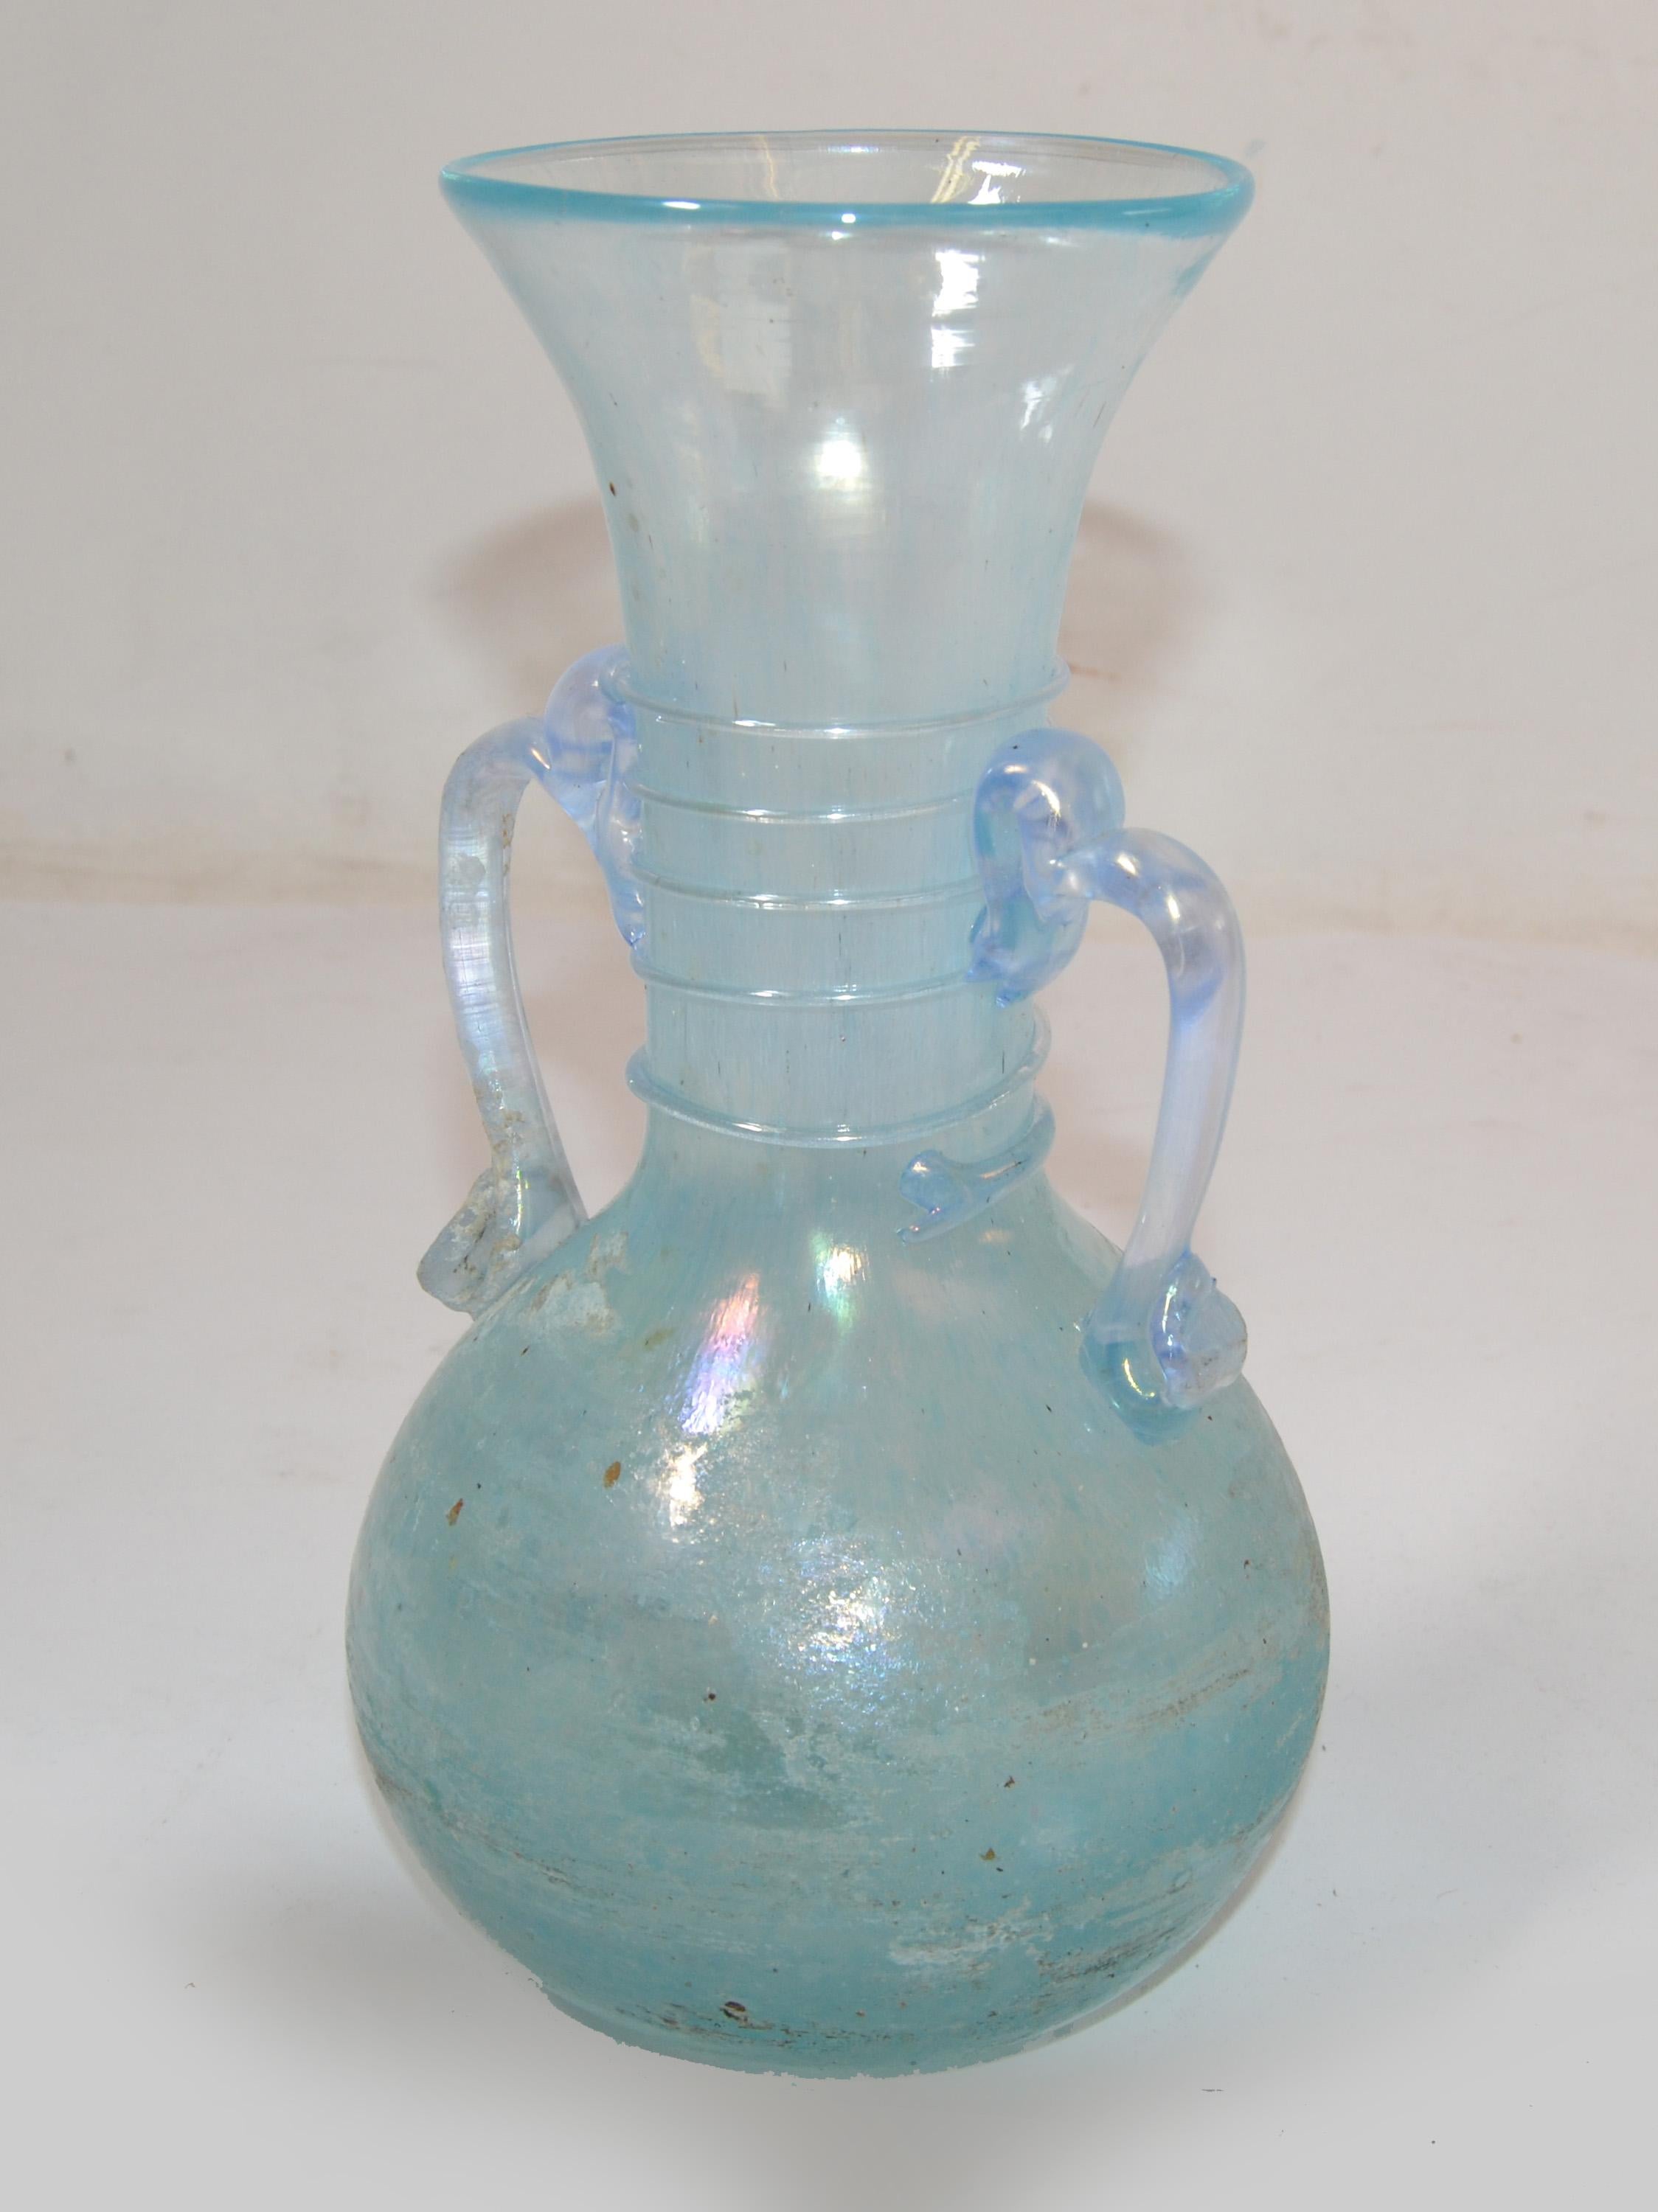 Murano baby blue scavo glass Murano Art glass bud vase, vessel, decanter Mid-Century Modern made in Italy in 1980.
Marked at the base, Made in Murano, Italy.
Measures Handle to Handle: 6 inches.
Opening measures: 3.38 inches.